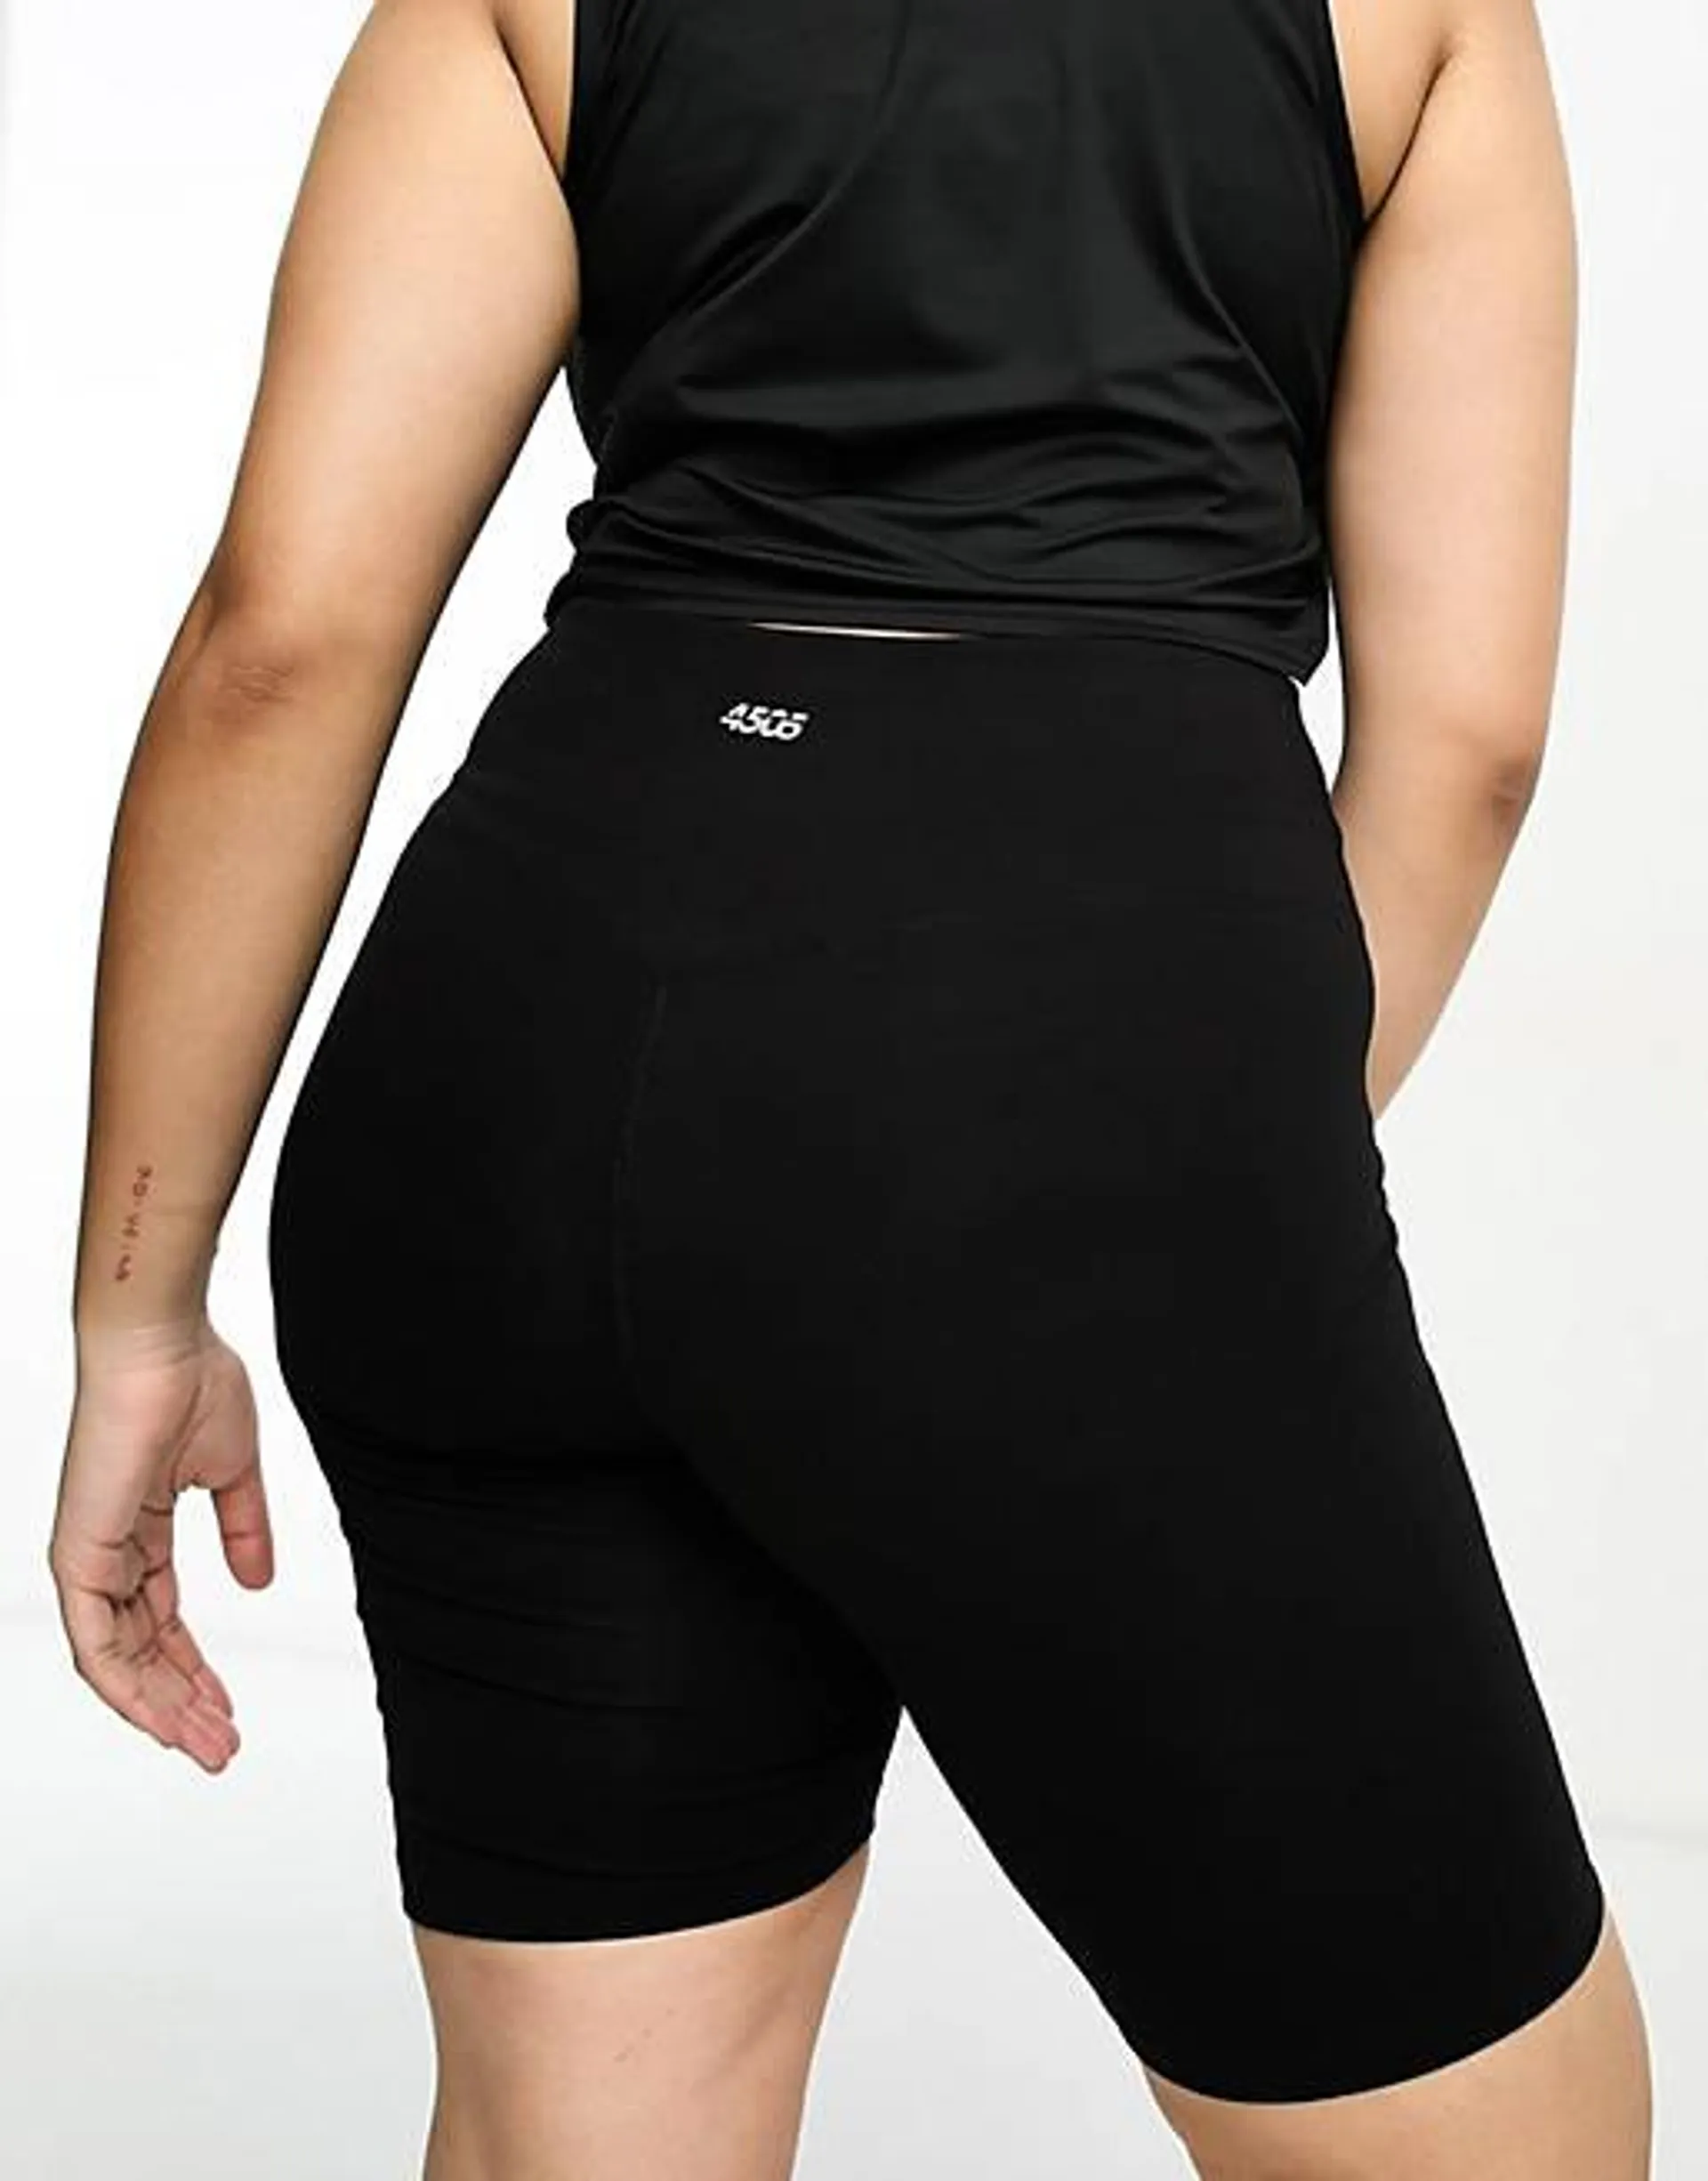 ASOS 4505 Curve icon 8 inch booty legging short in cotton touch